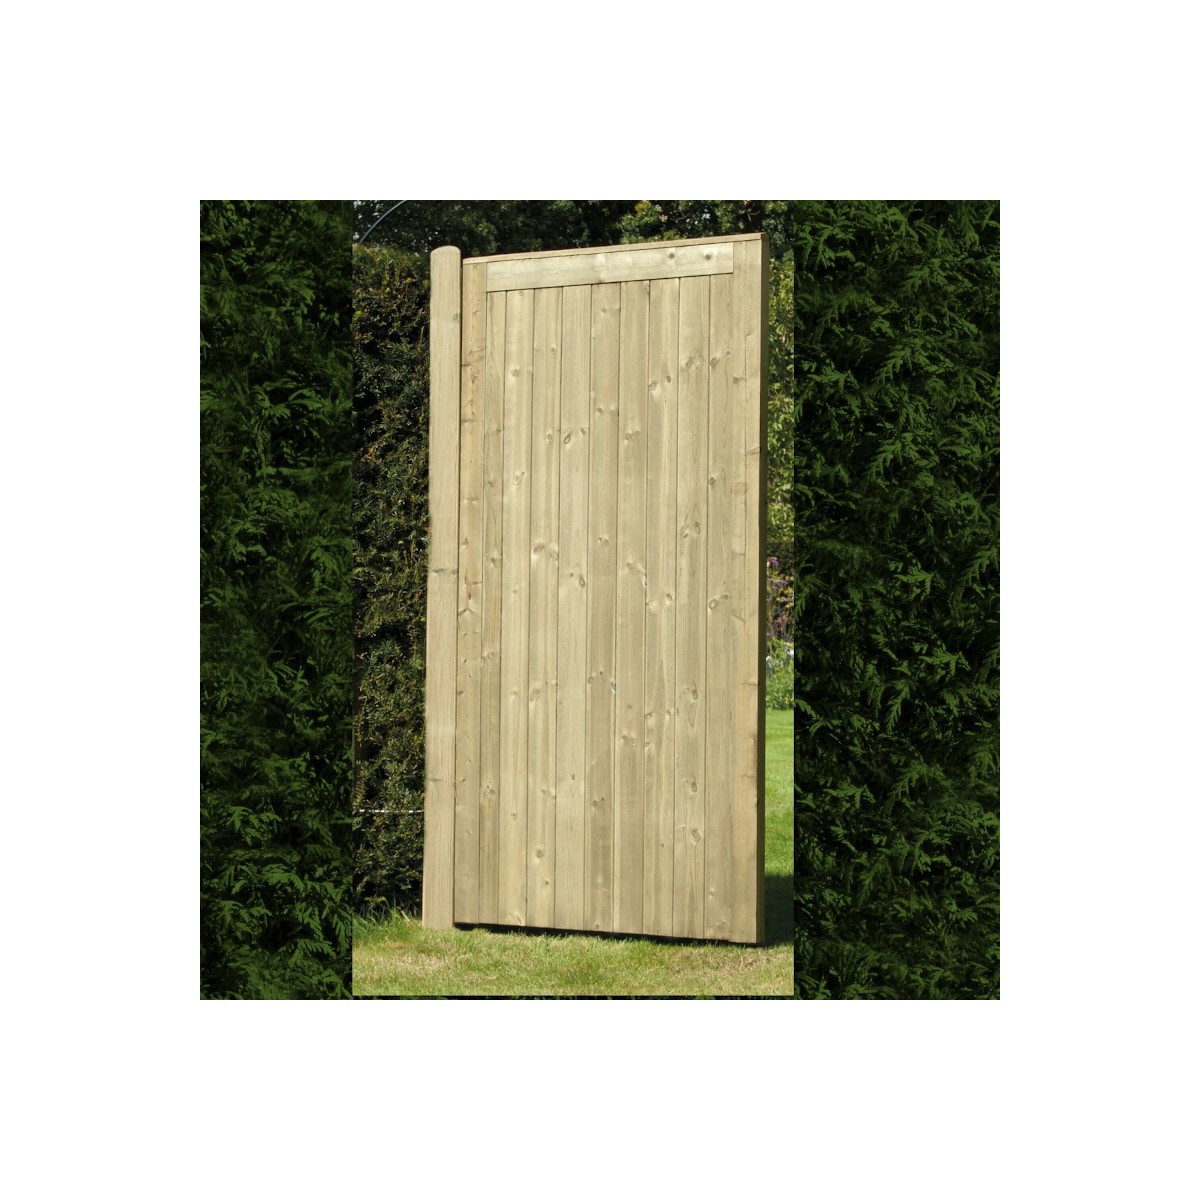 Elite Tongue and Groove Gate Pressure Treated Braced and Ledged High Quality 